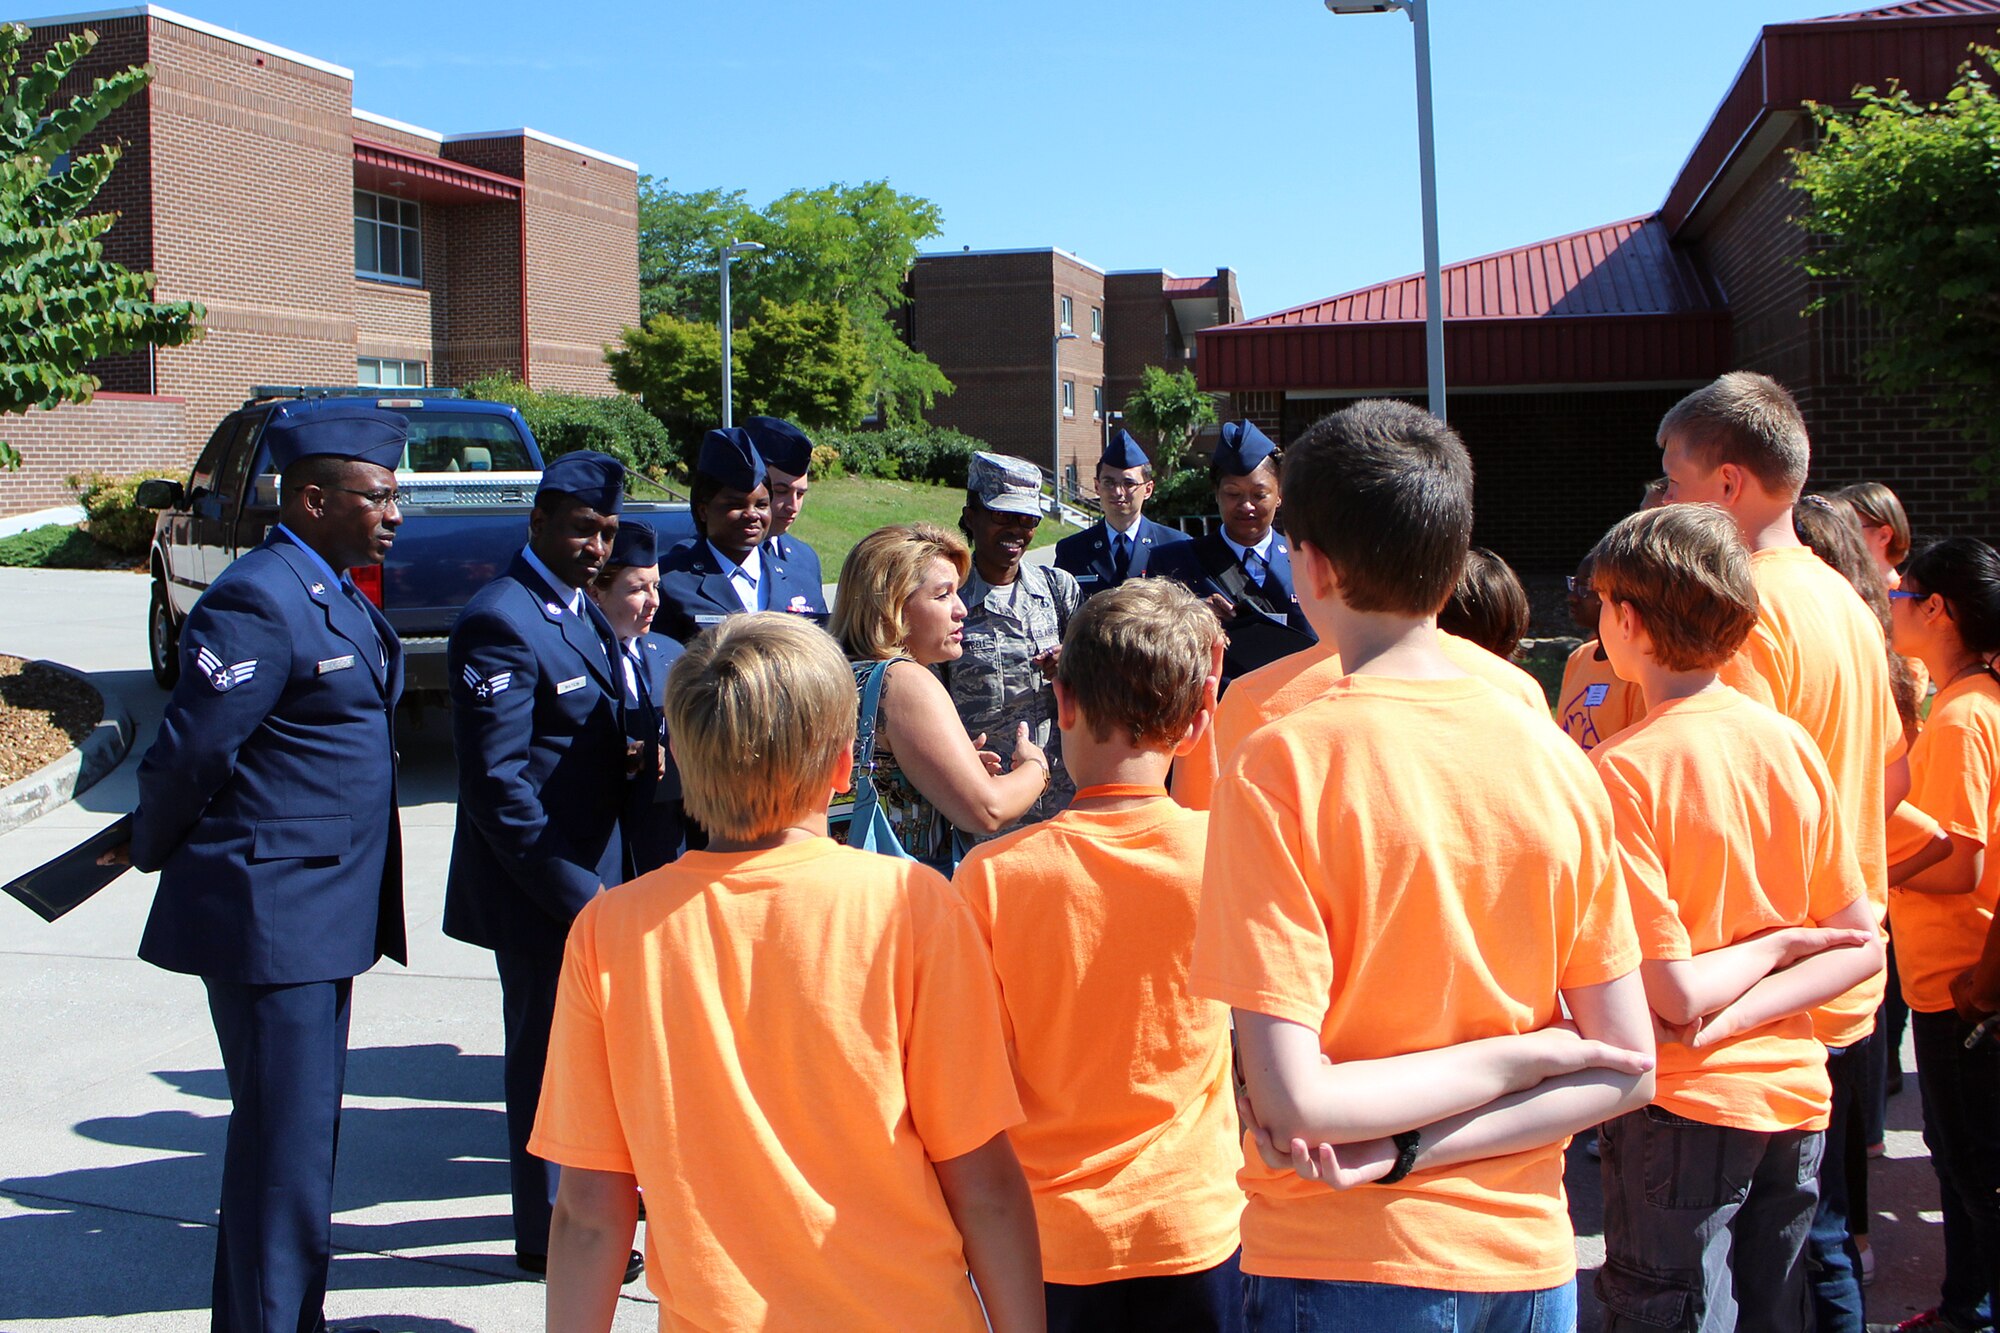 Tammie Smeltzer, Professional Continuing Education manager for the I.G. Brown Training and Education Center, speaks to kids in summer camp with the University of Tennessee's Junior Leadership Institute during a visit at the TEC, June 29, 2016, on McGhee Tyson Air National Guard Base in Louisville, Tenn. (Photo courtesy University of Tennessee)